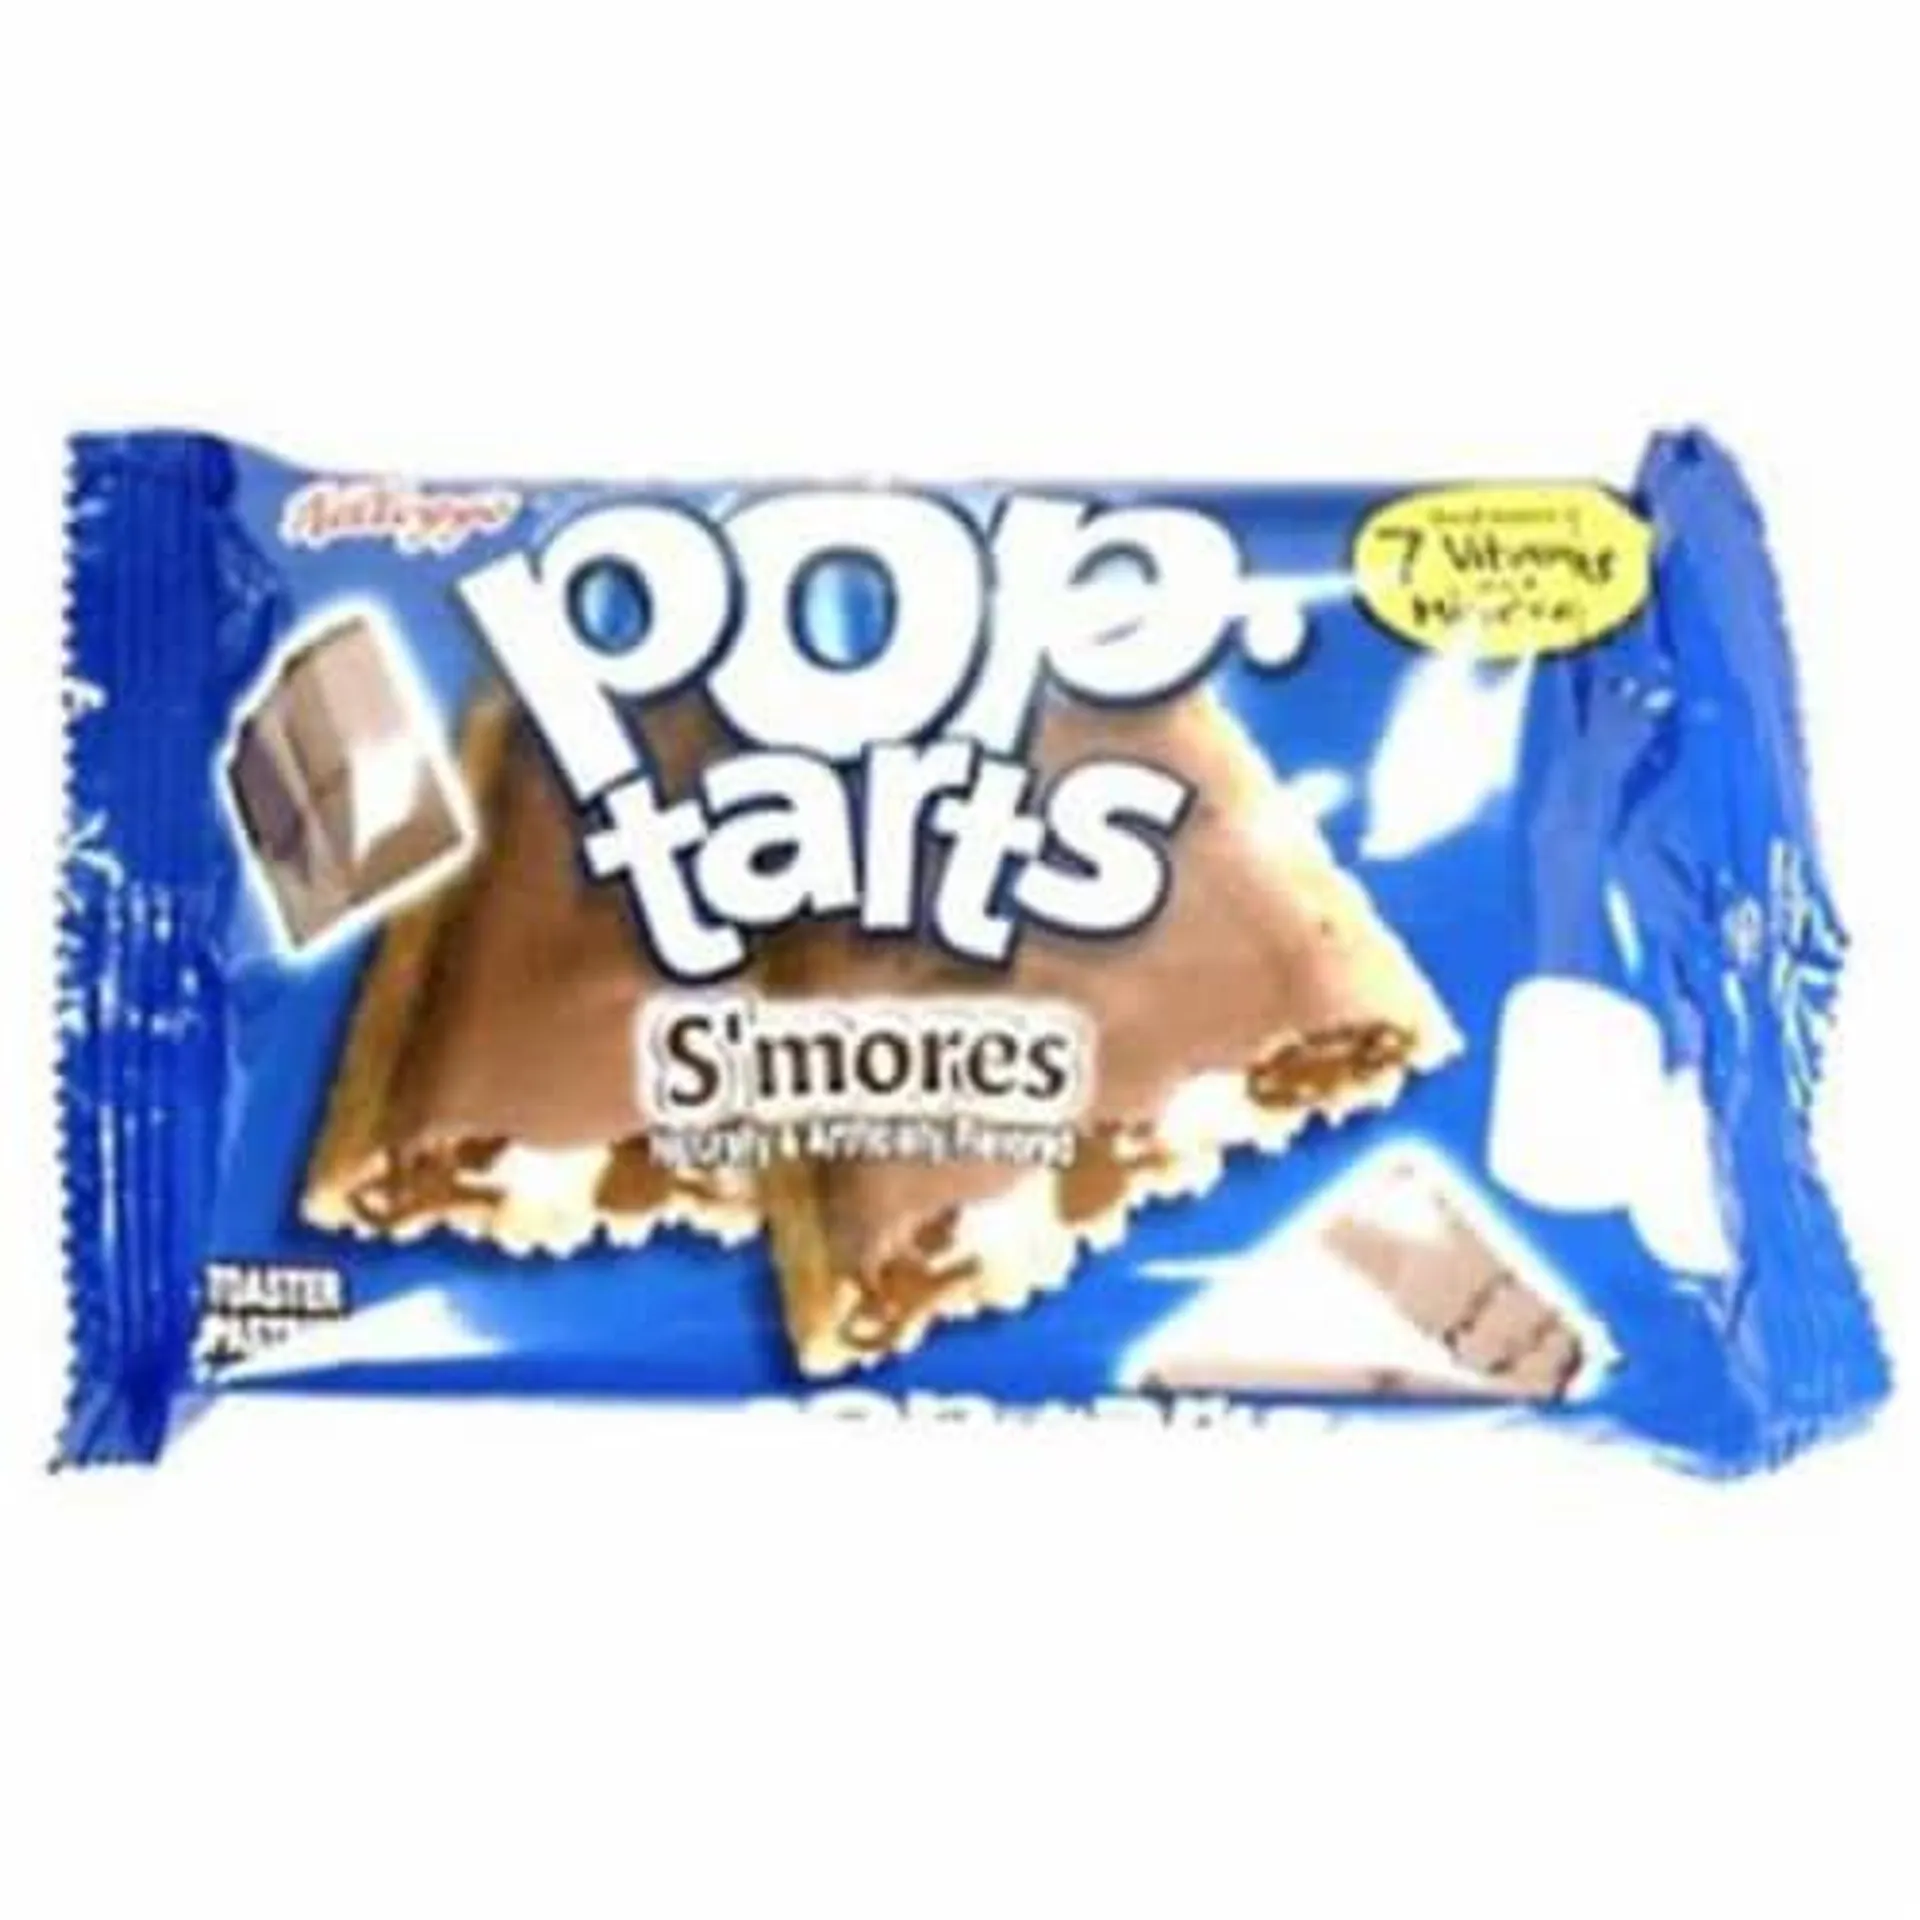 Kelloggs 3657 3.67 Oz. Pop Tarts Frosted Smores Pastries, Case Of 6 - 2 Per Pack